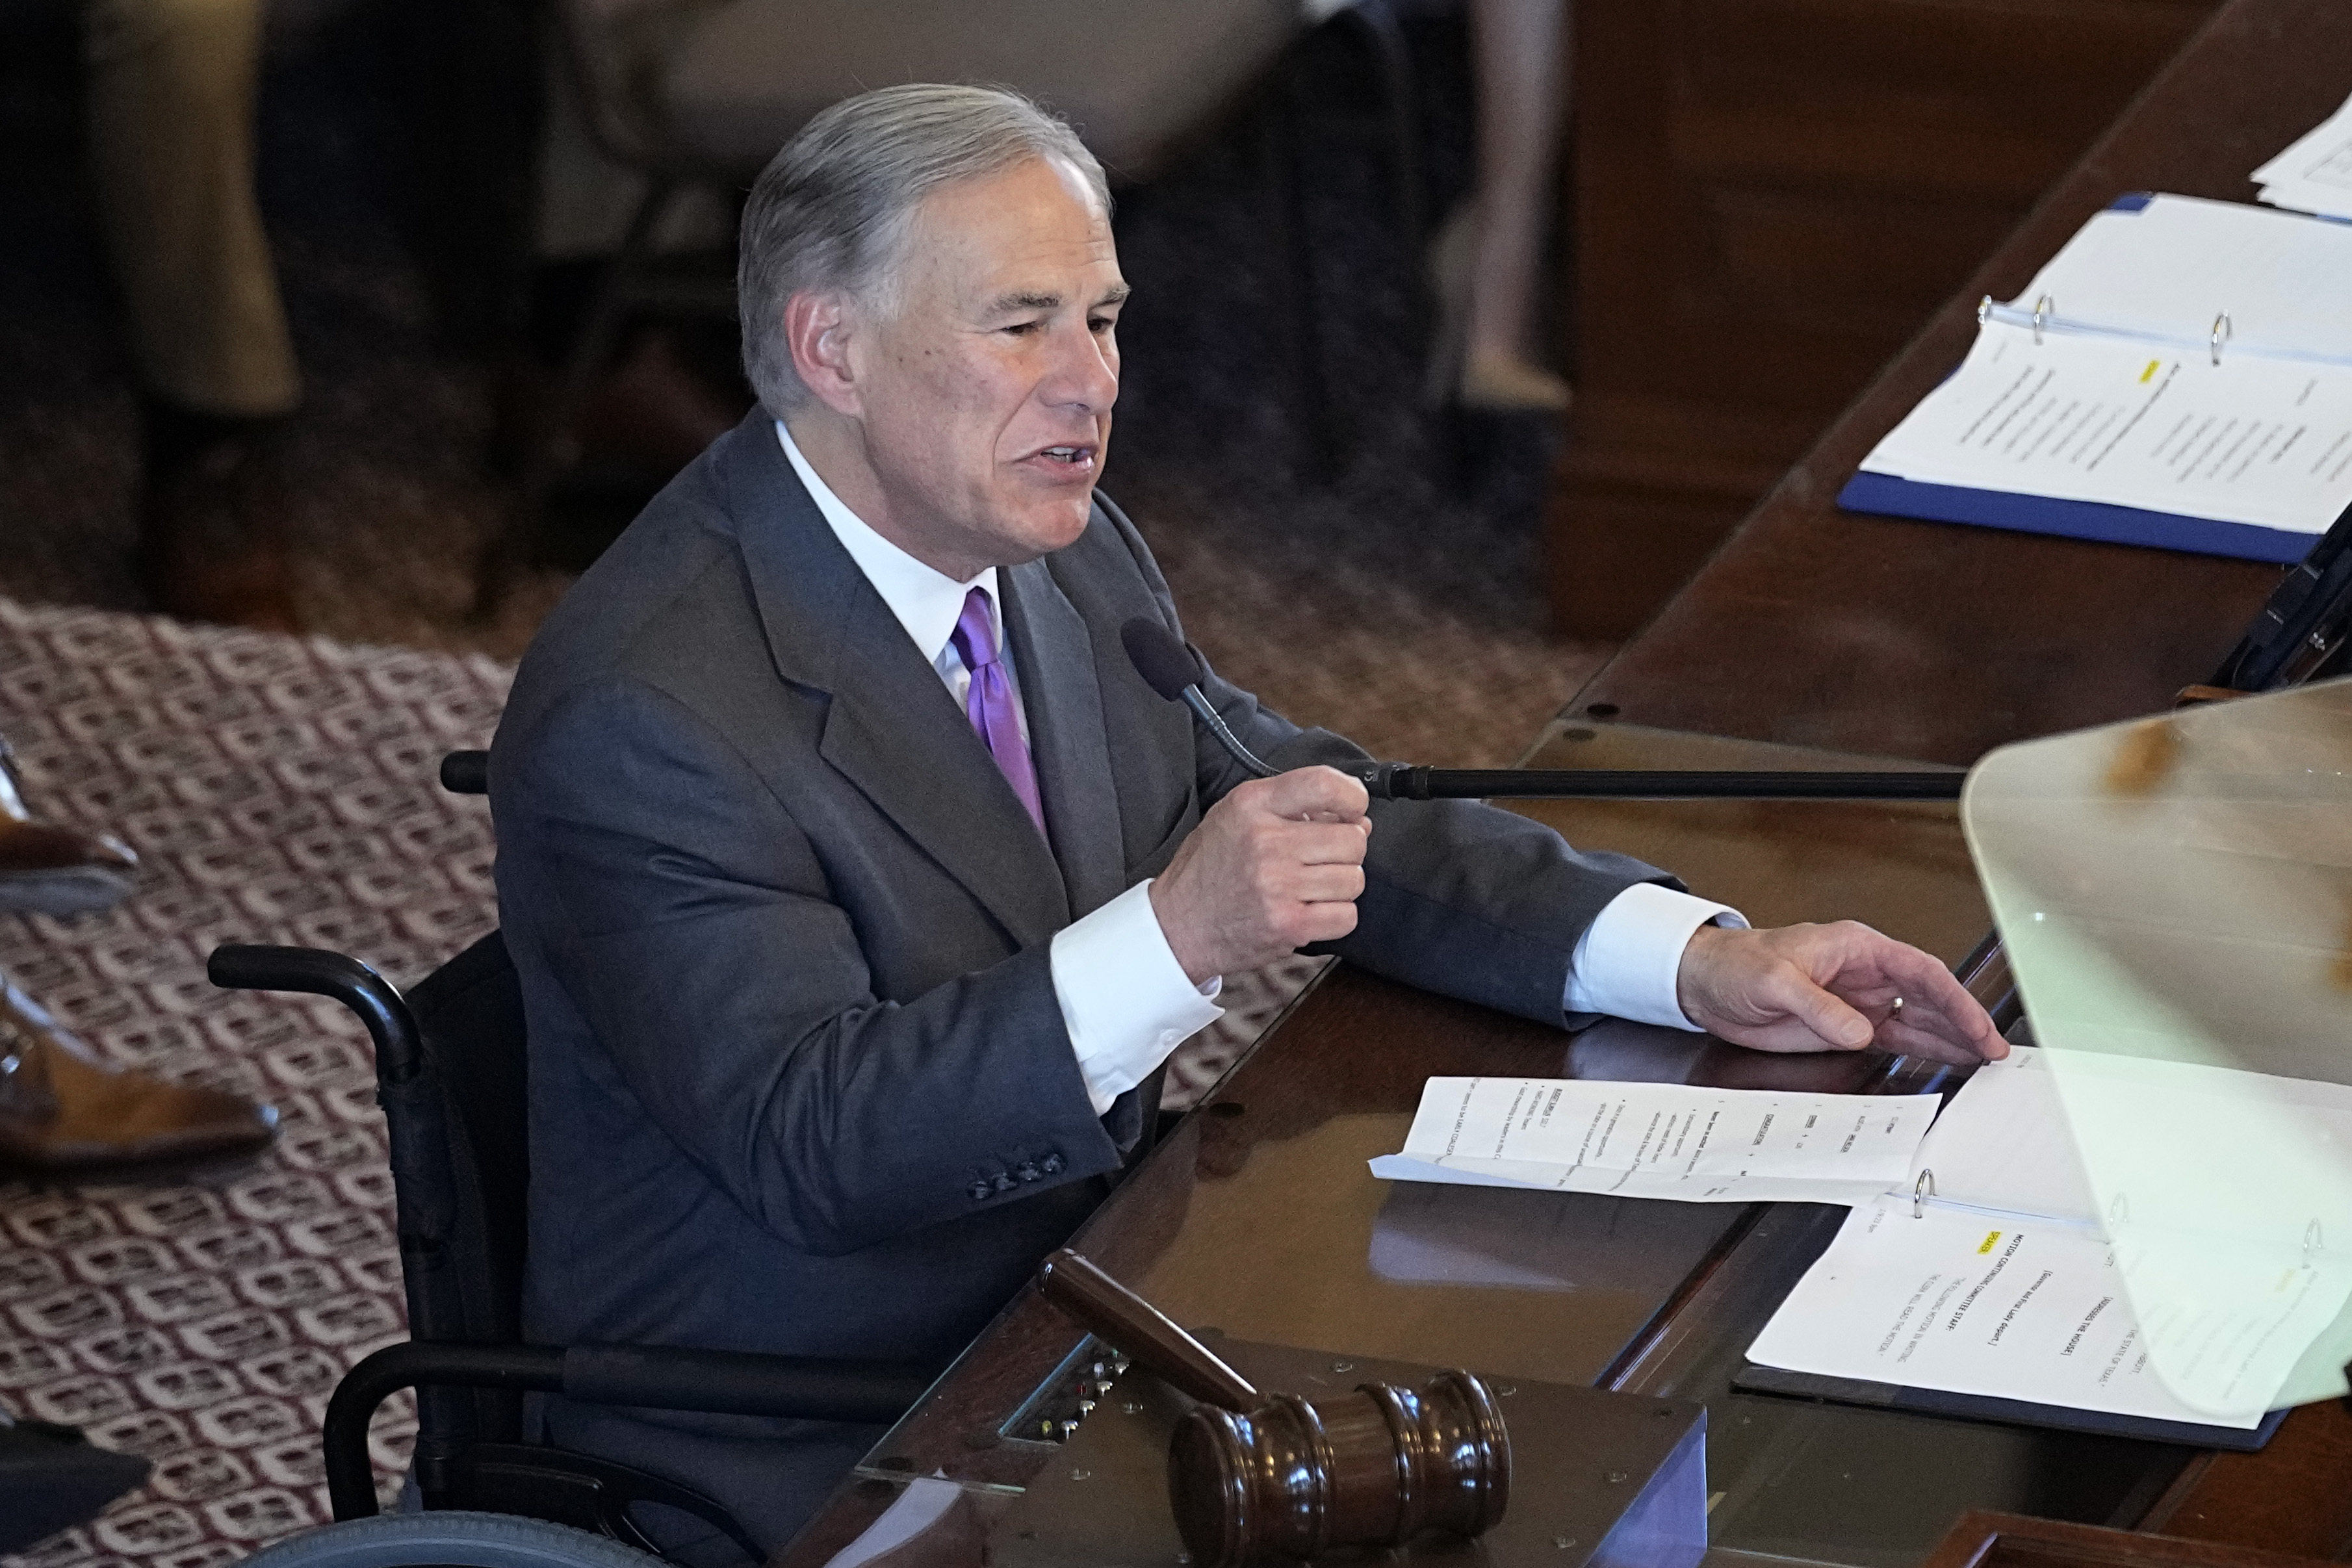 Texas Governor Greg Abbott has been a vocal advocate of banning the use of TikTok on state-issued devices and networks. Photo: AP